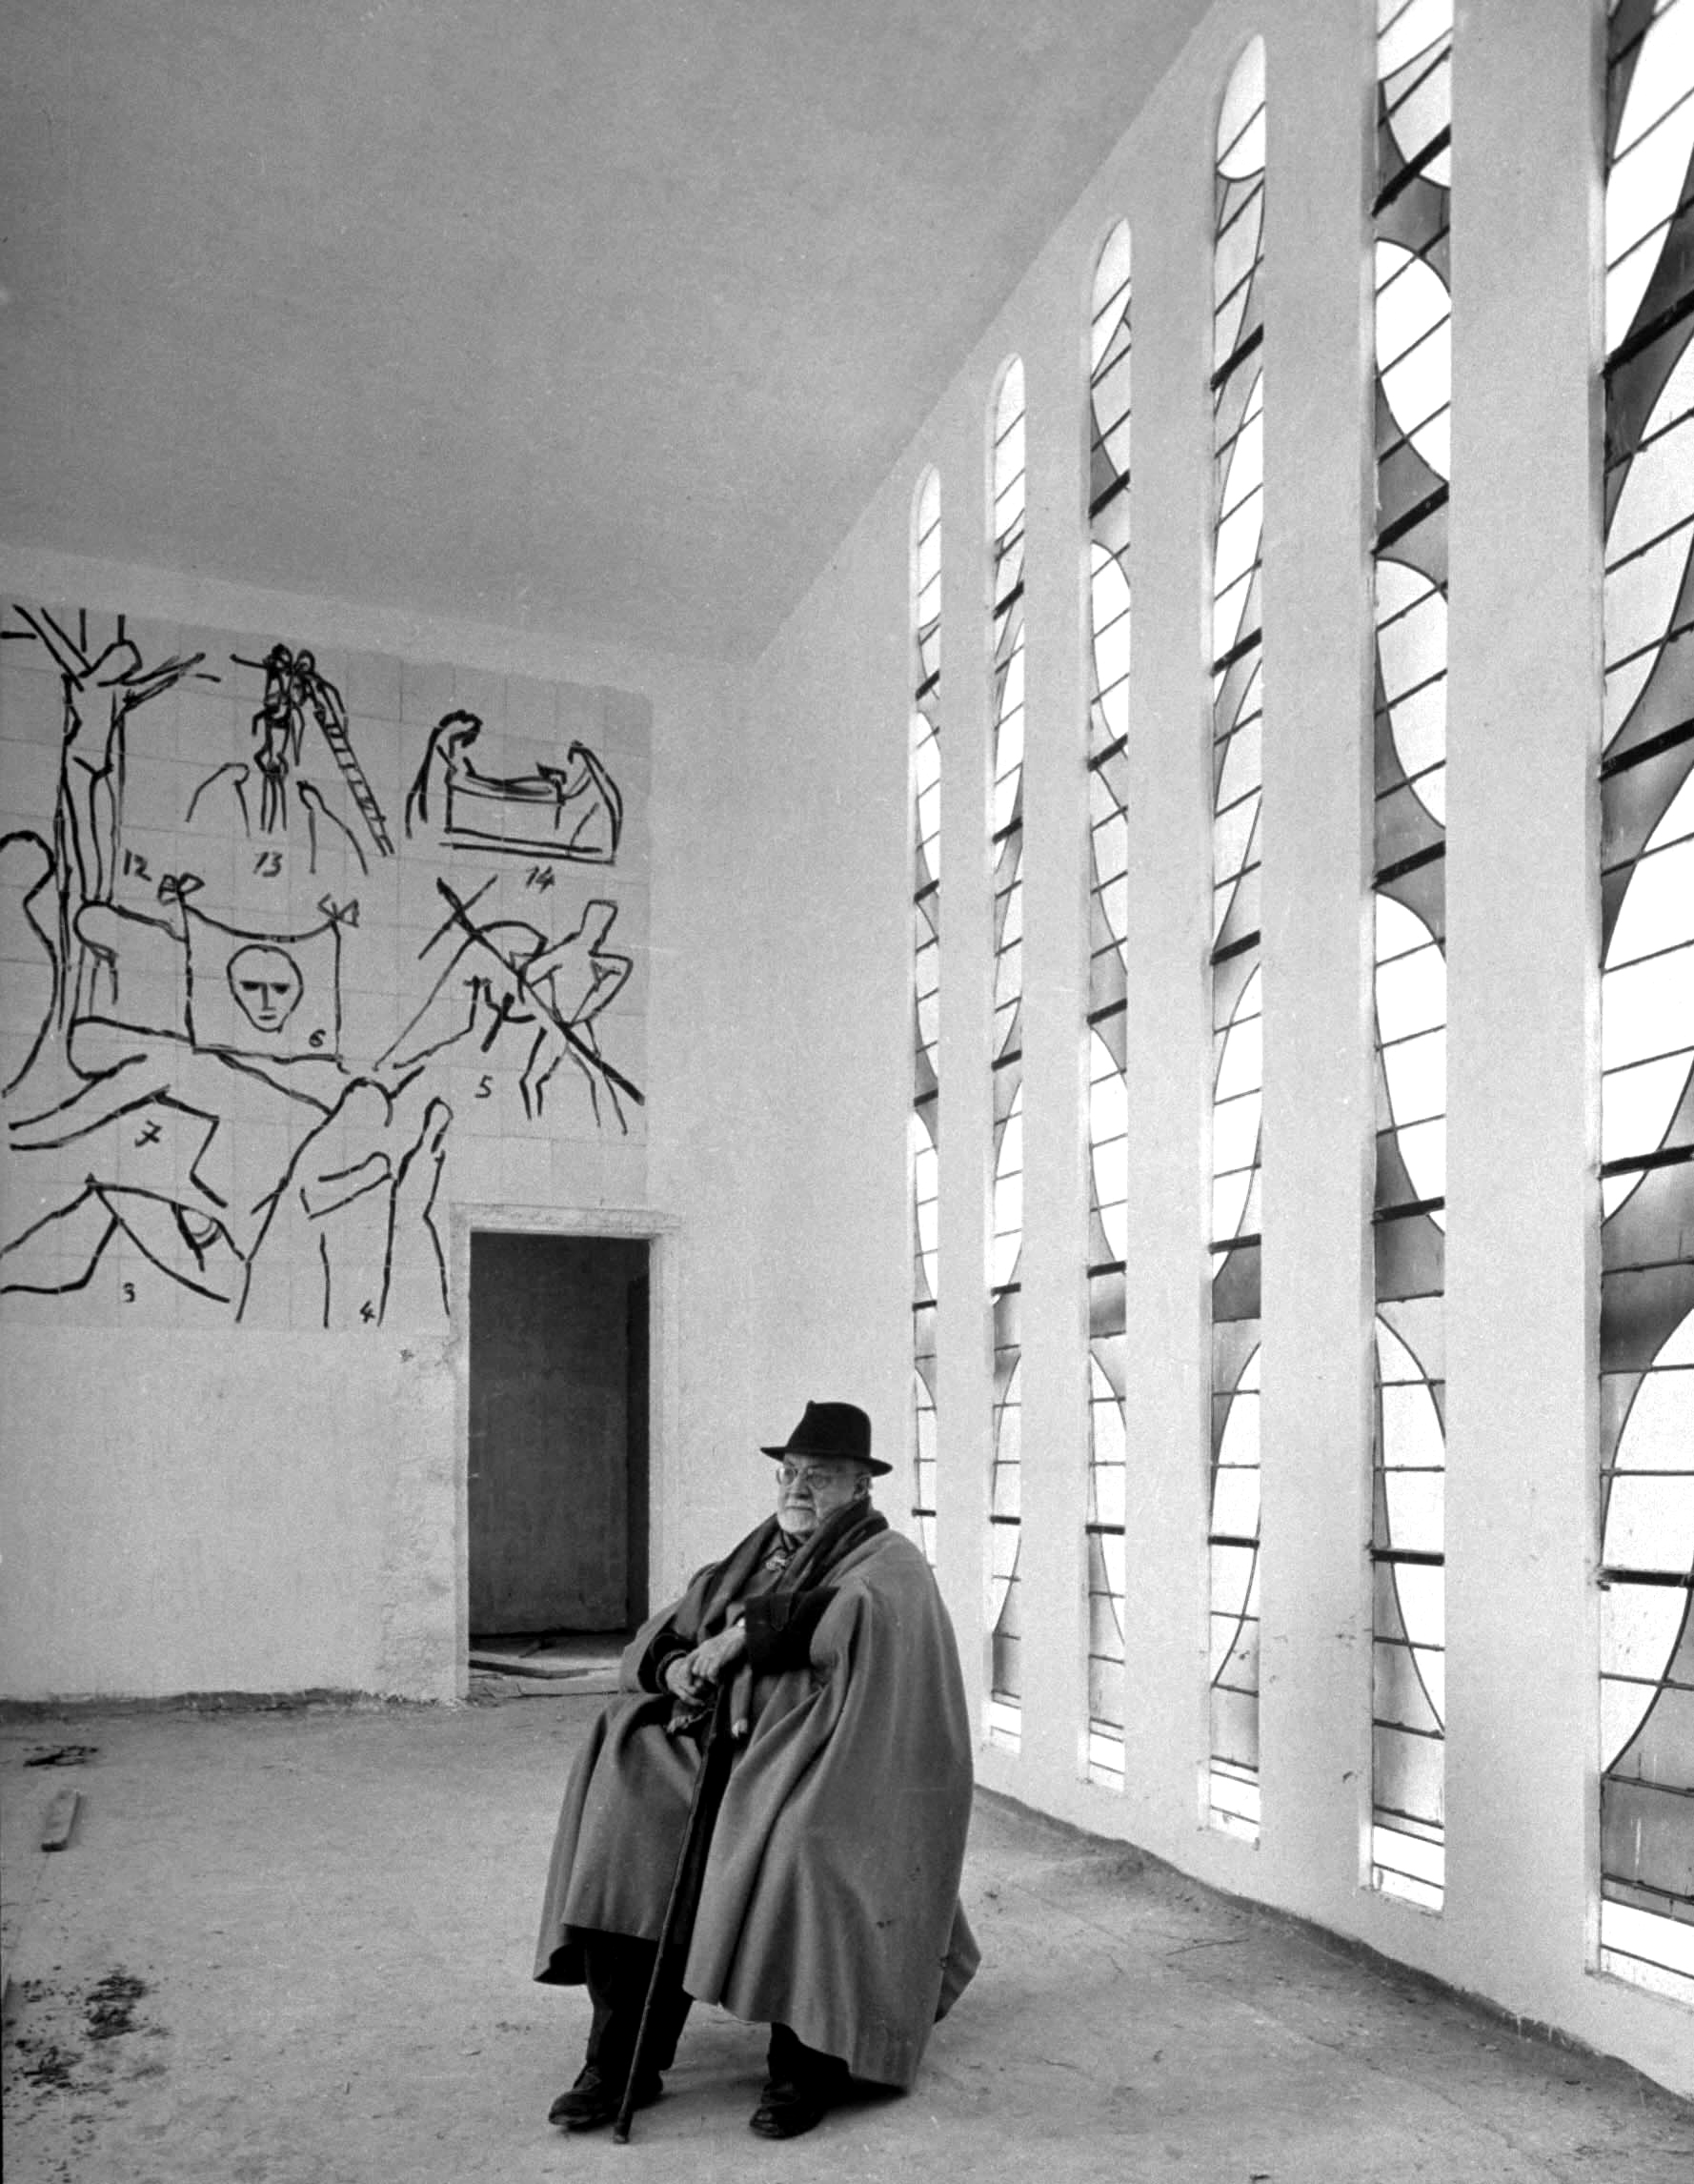 In 1951, Henri Matisse sits in the Chapel of the Rosary in Vence, France — a building he designed and decorated, and that he considered his life's masterpiece.